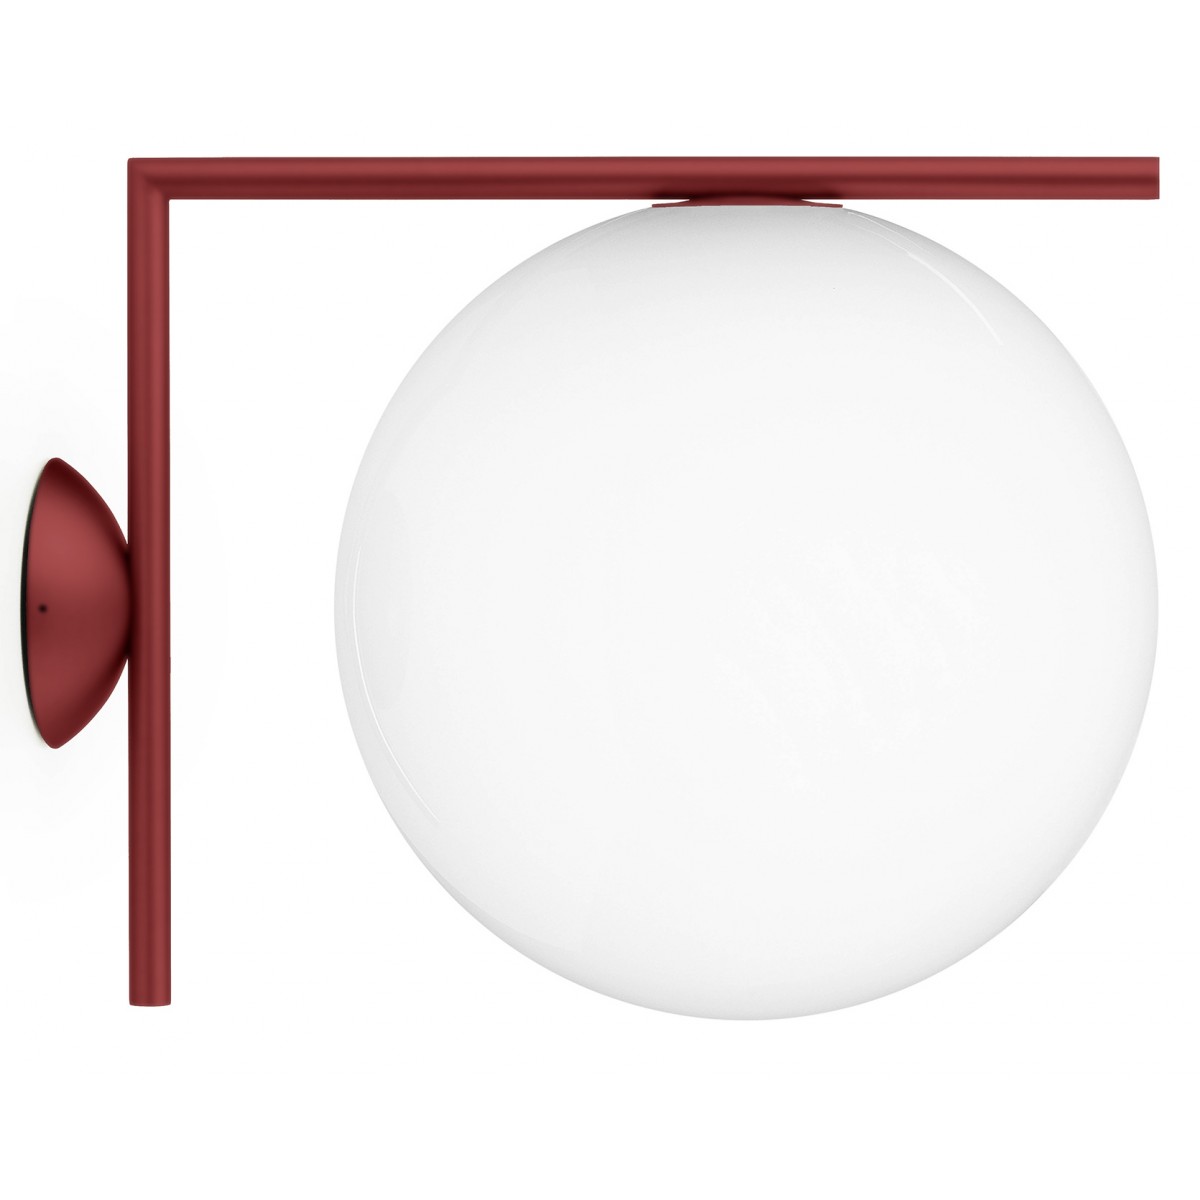 Burgundy red - F012J00C037 - IC Outdoor W2 wall lamp